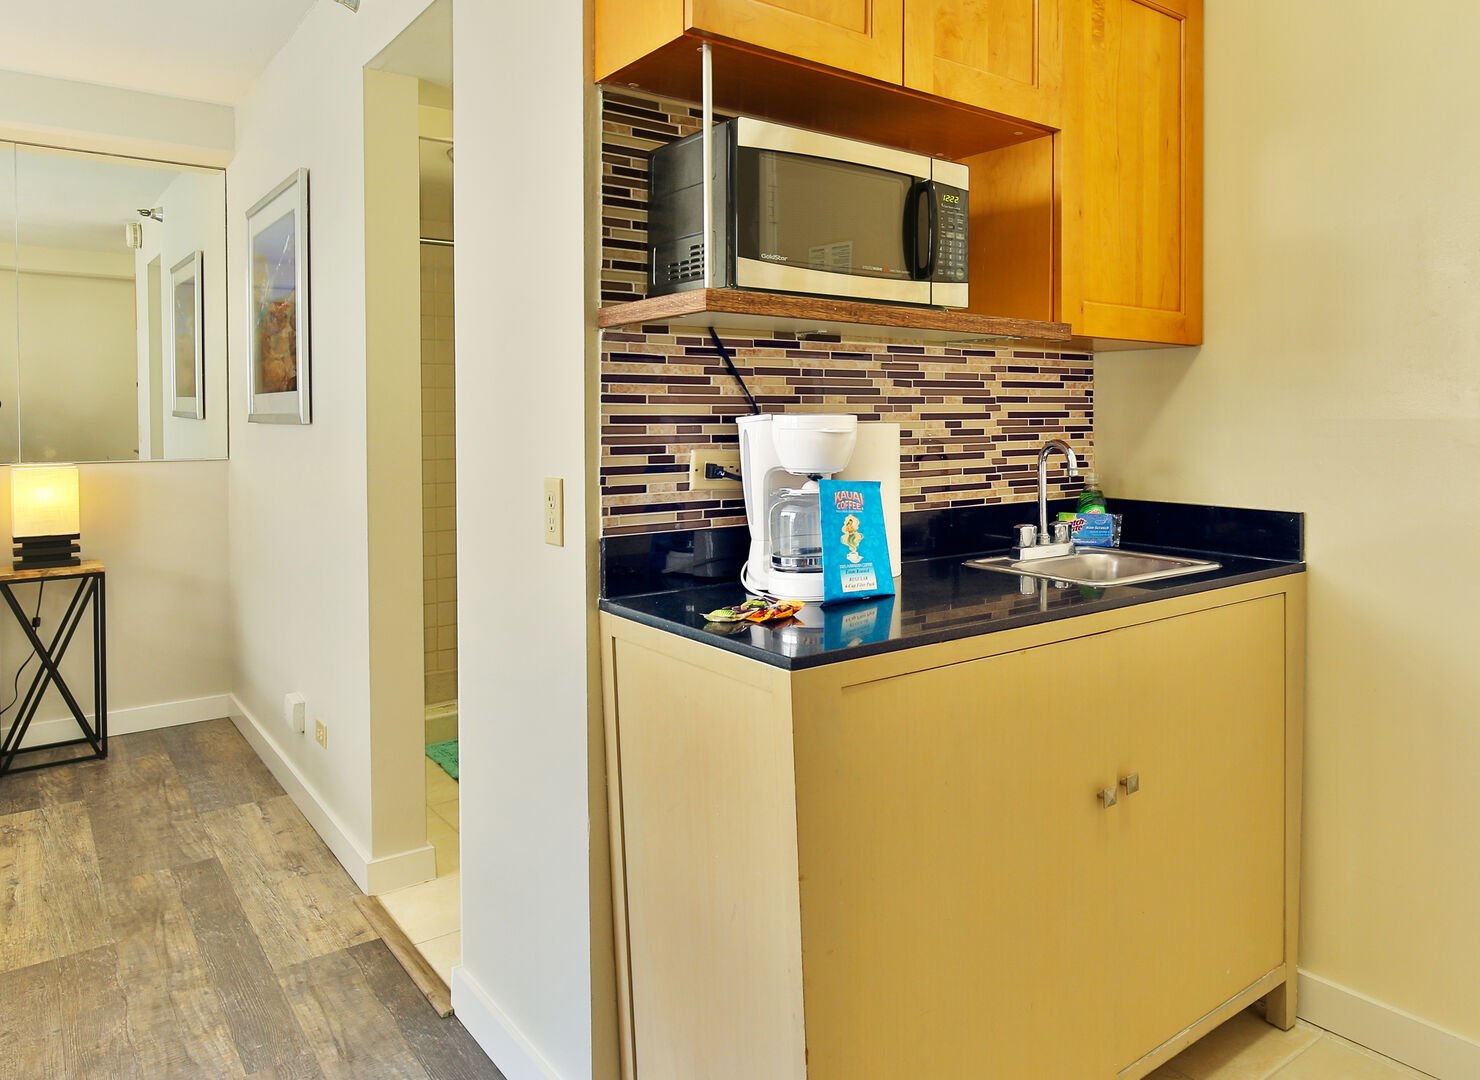 The kitchenette is equipped with a microwave, a mini refrigerator, a toaster, a coffee maker, dishes, silverware, and basic cooking utensils.